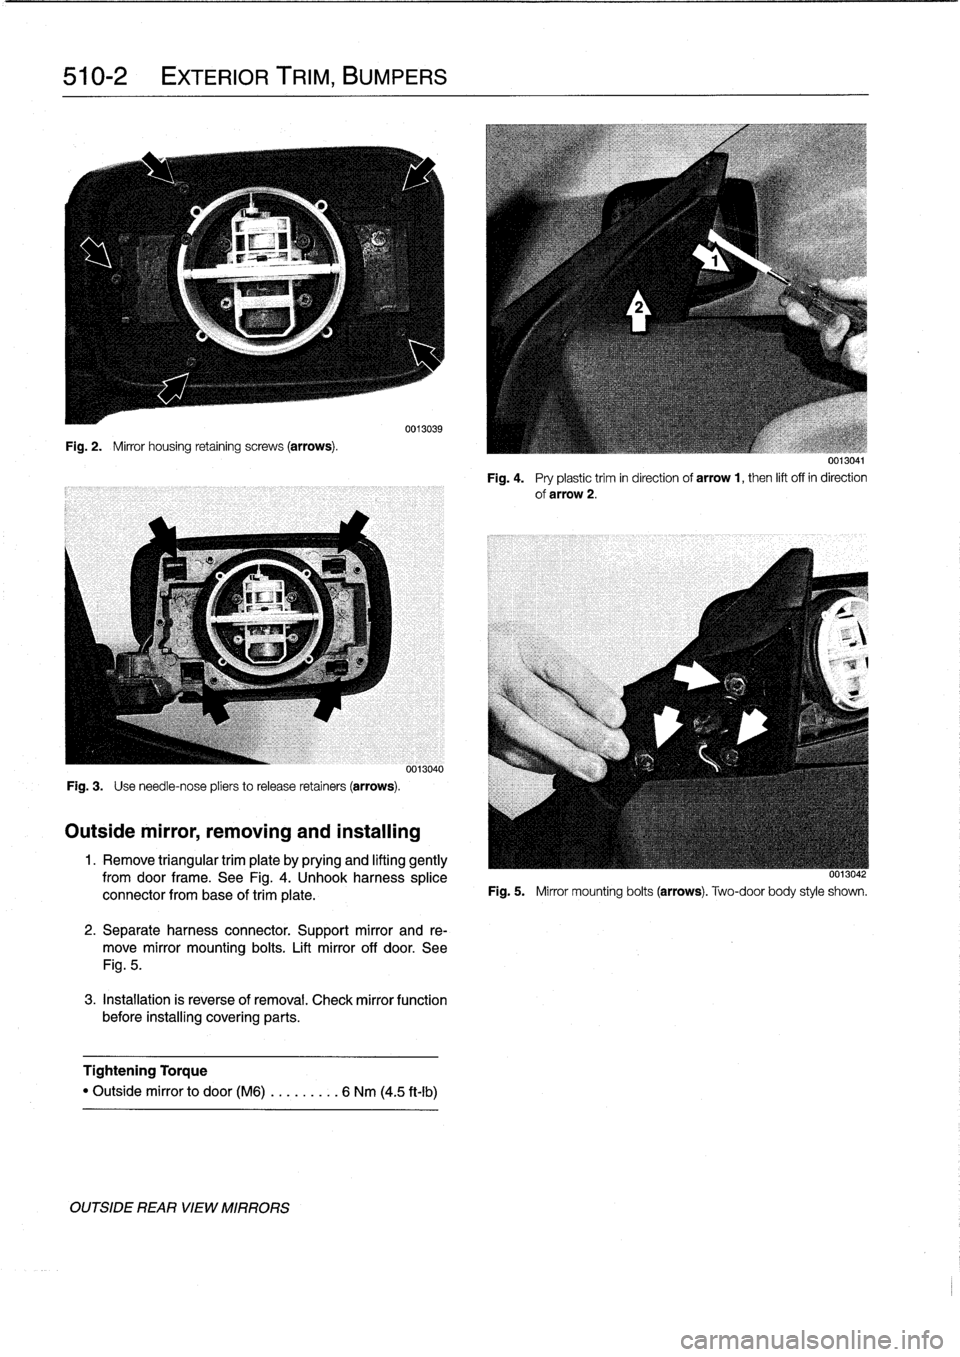 BMW 325i 1994 E36 Workshop Manual 
510-2

	

EXTERIOR
TRIIVI,
BUMPERS

Fig
.
2
.

	

Mirror
housing
retaining
screws
(arrows)
.

Fig
.
3
.

	

Use
need1e-nose
pliers
to
release
retainers
(arrows)
.

Outside
mirror,
removing
and
instal